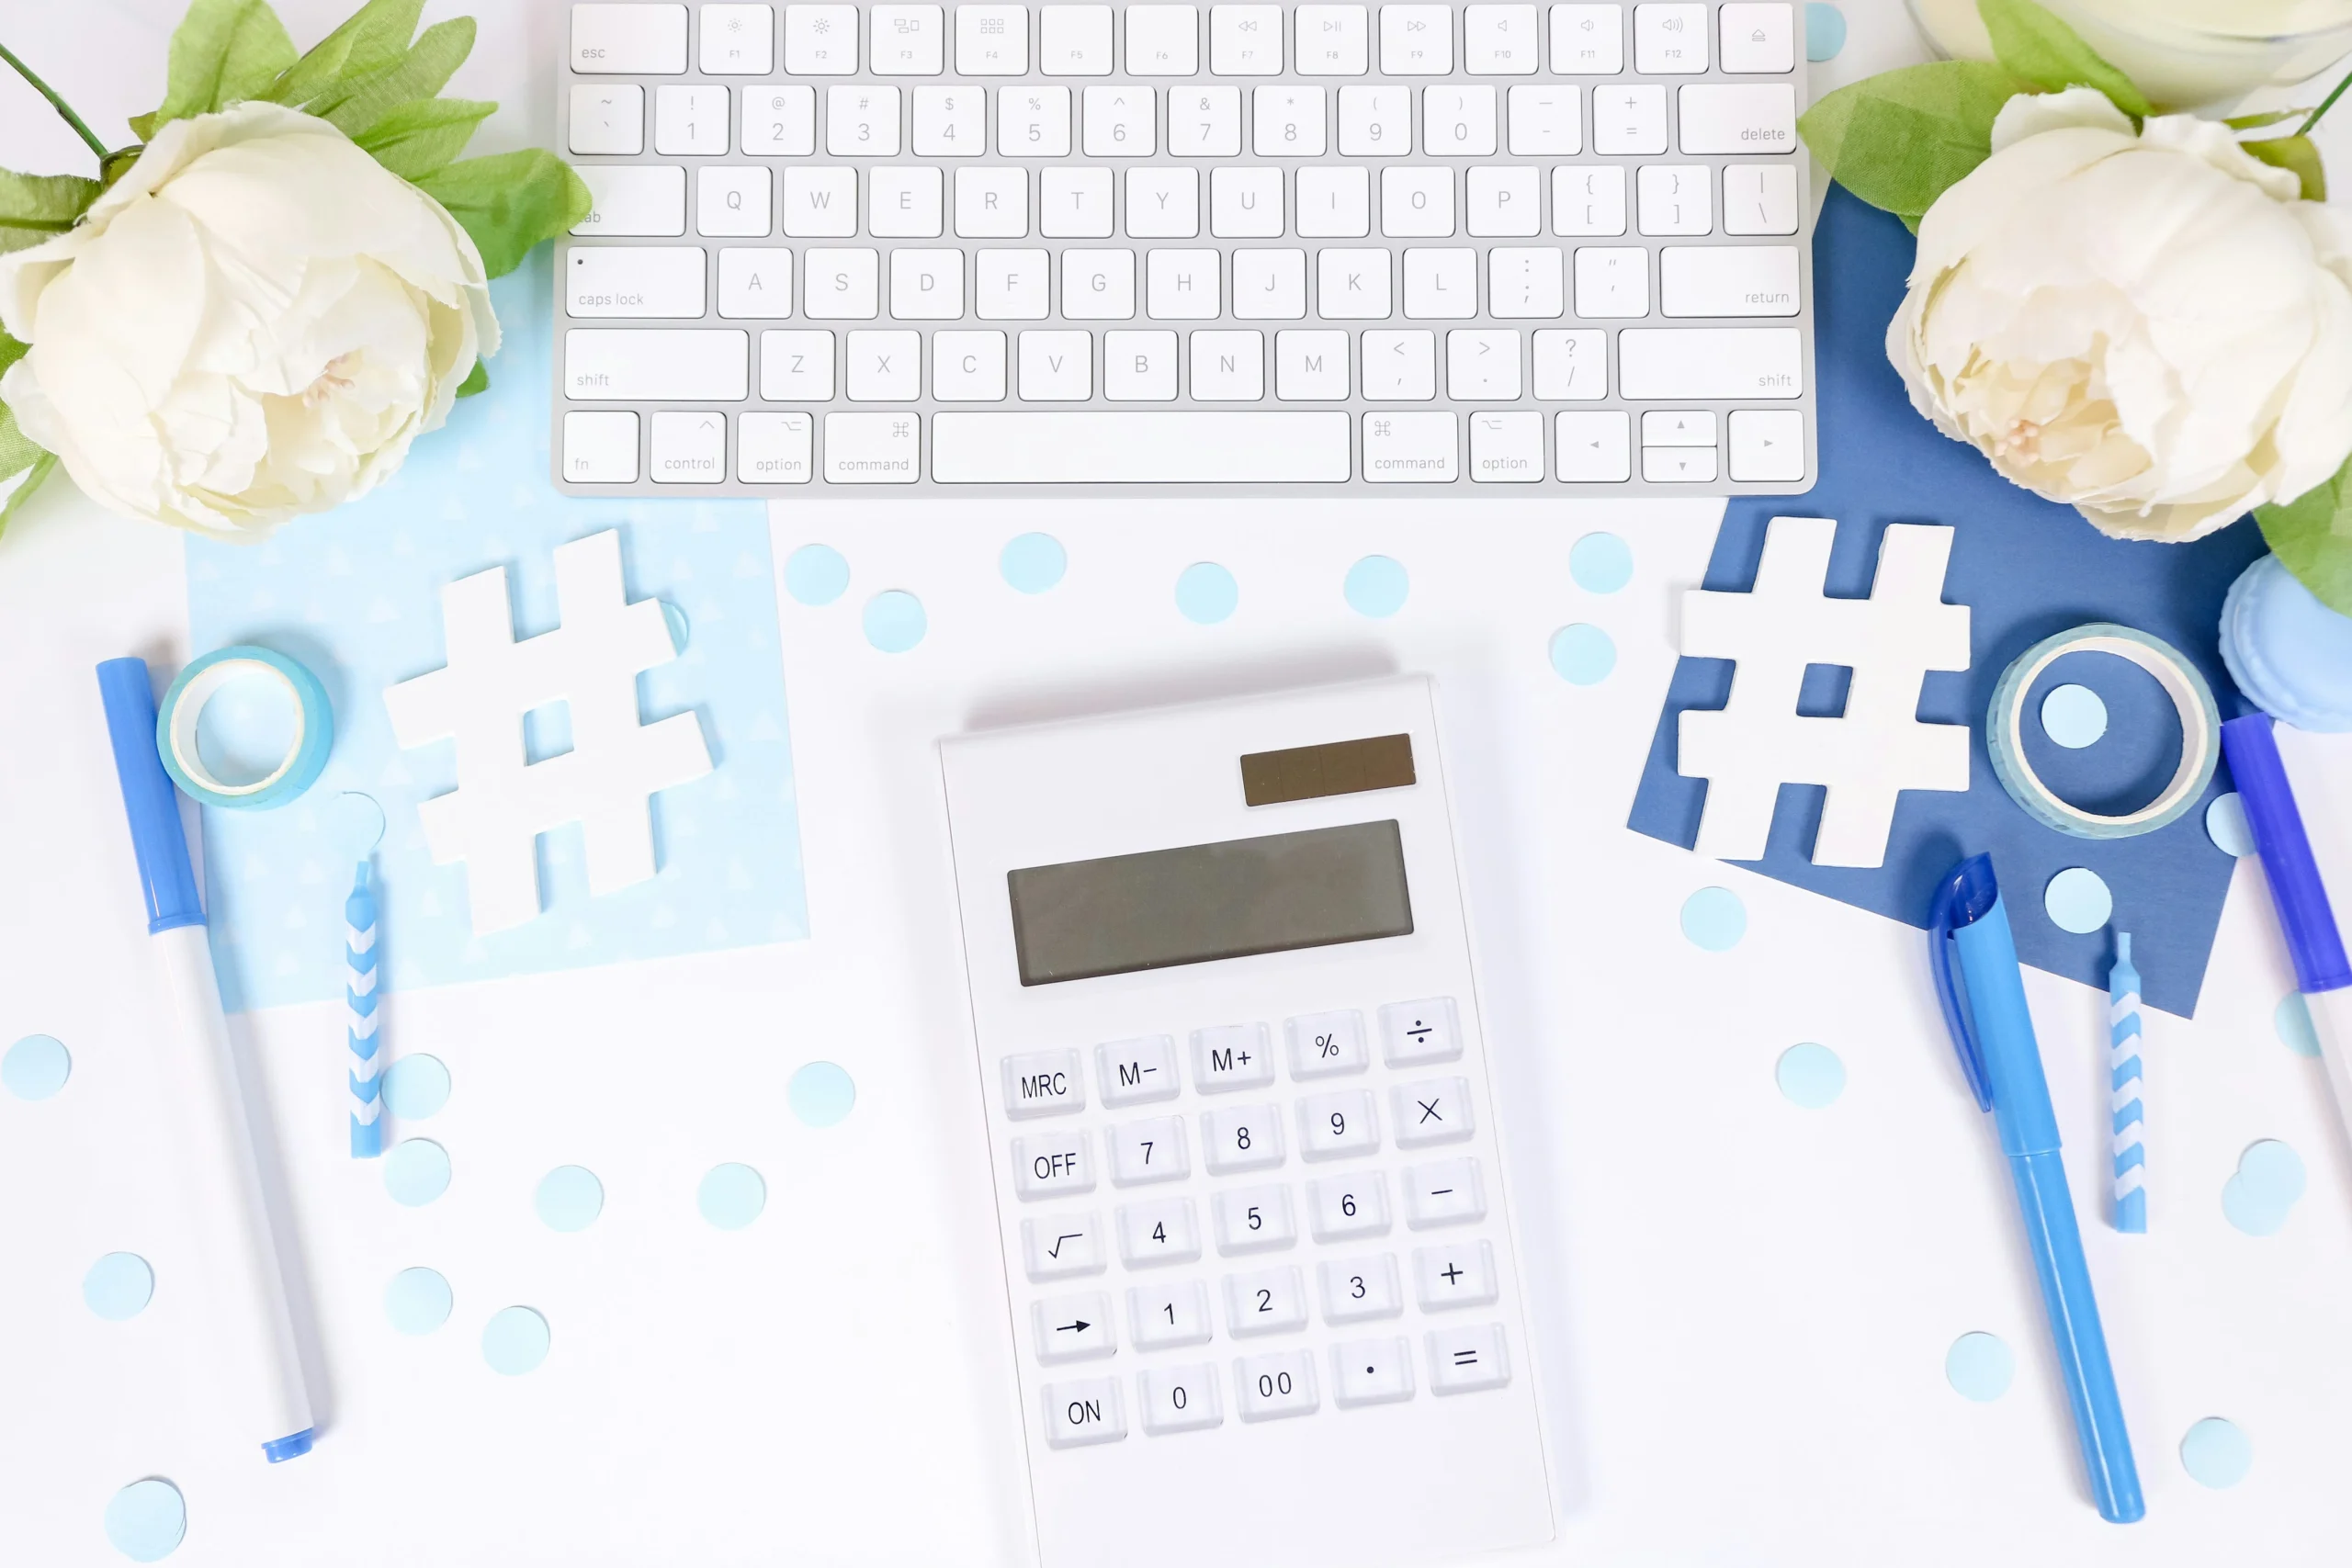 a calculator and some stationary are near a computer keyboard. white hashtags are laying on top. these objects symbolize remote accounting services.